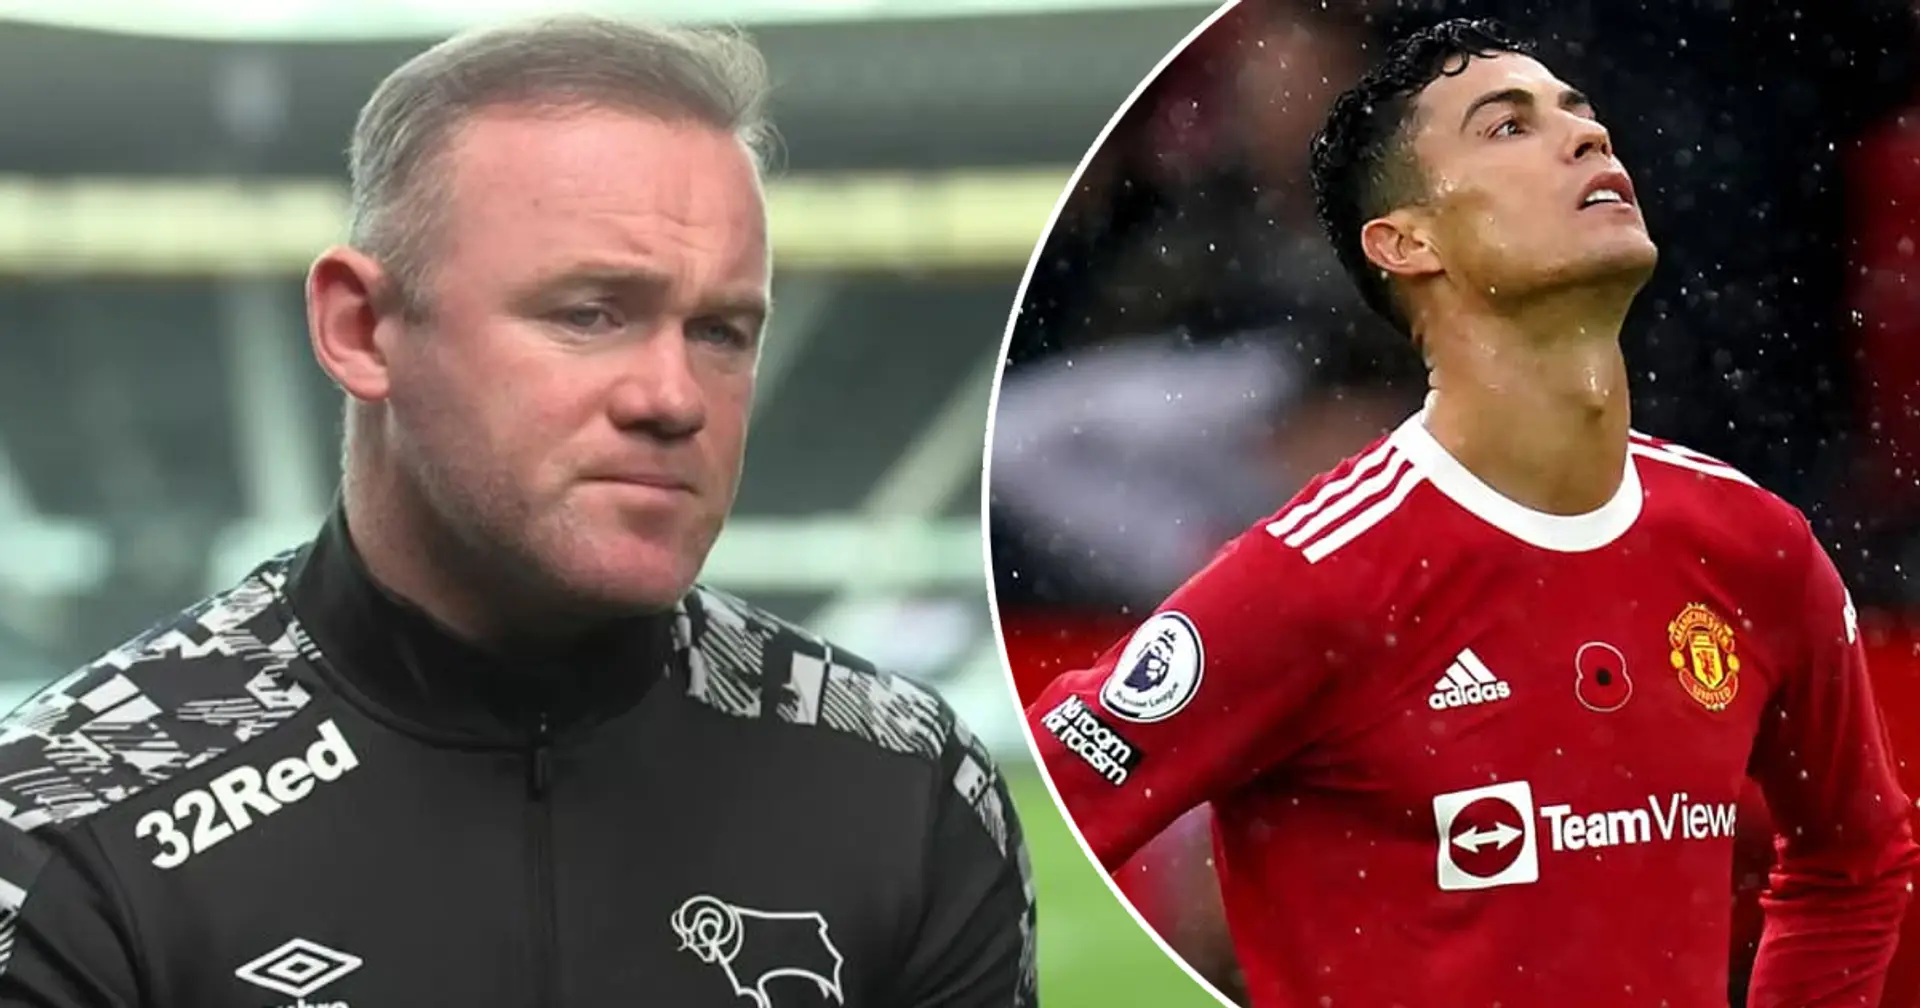 'I just loved our connection': Rooney names favourite Man United strike partner, it's not Ronaldo